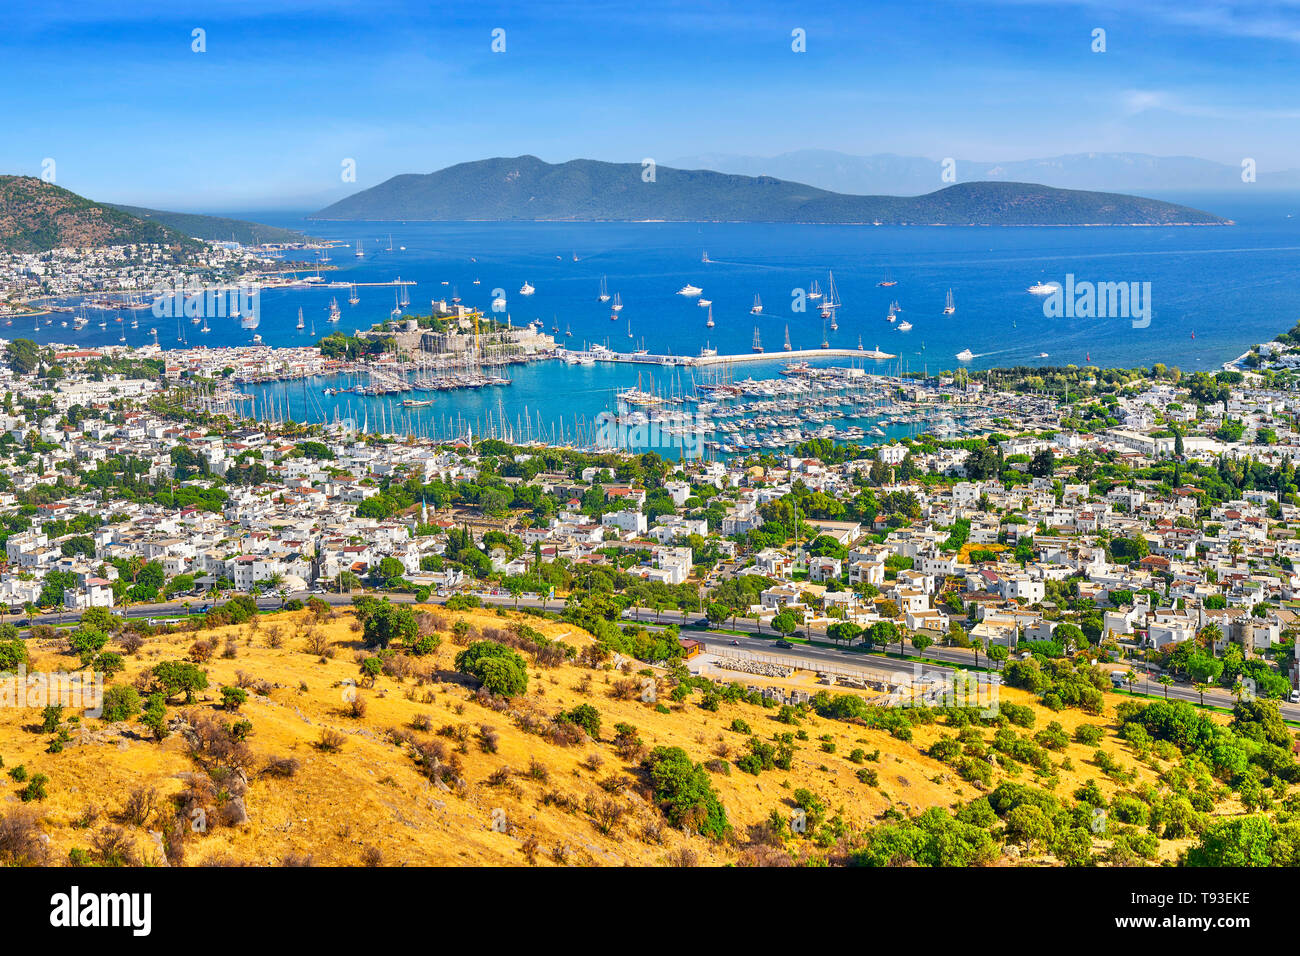 Landscape view of Bodrum harbor and castle, Turkey Stock Photo